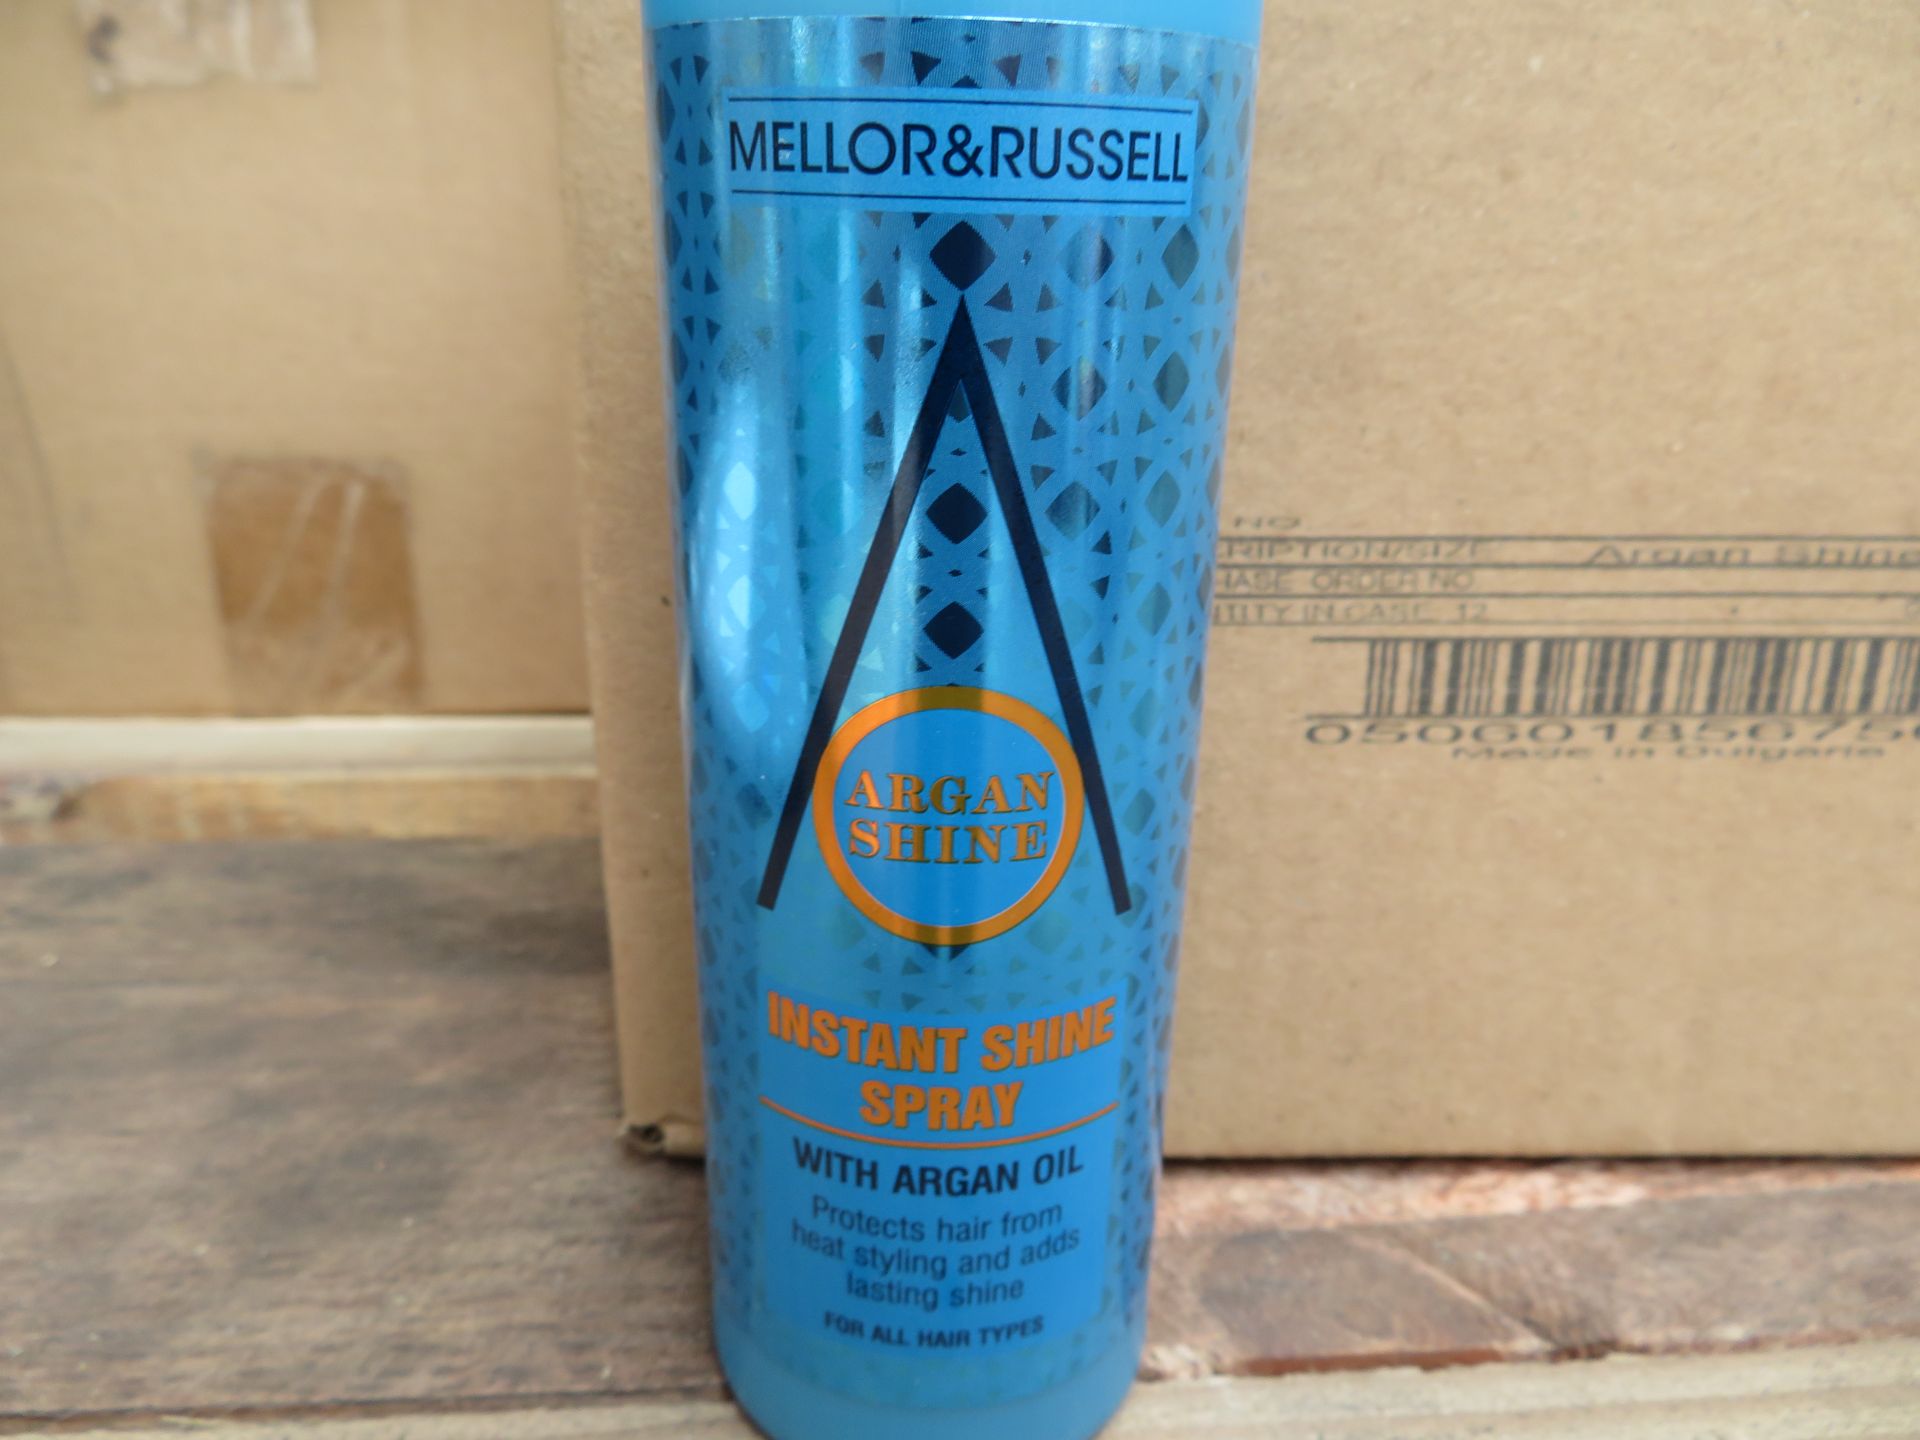 120 x Mellor & Russell Argan Shine Instant Shine Spray 200ml - with Argon Oil. Protects hair from - Bild 2 aus 3